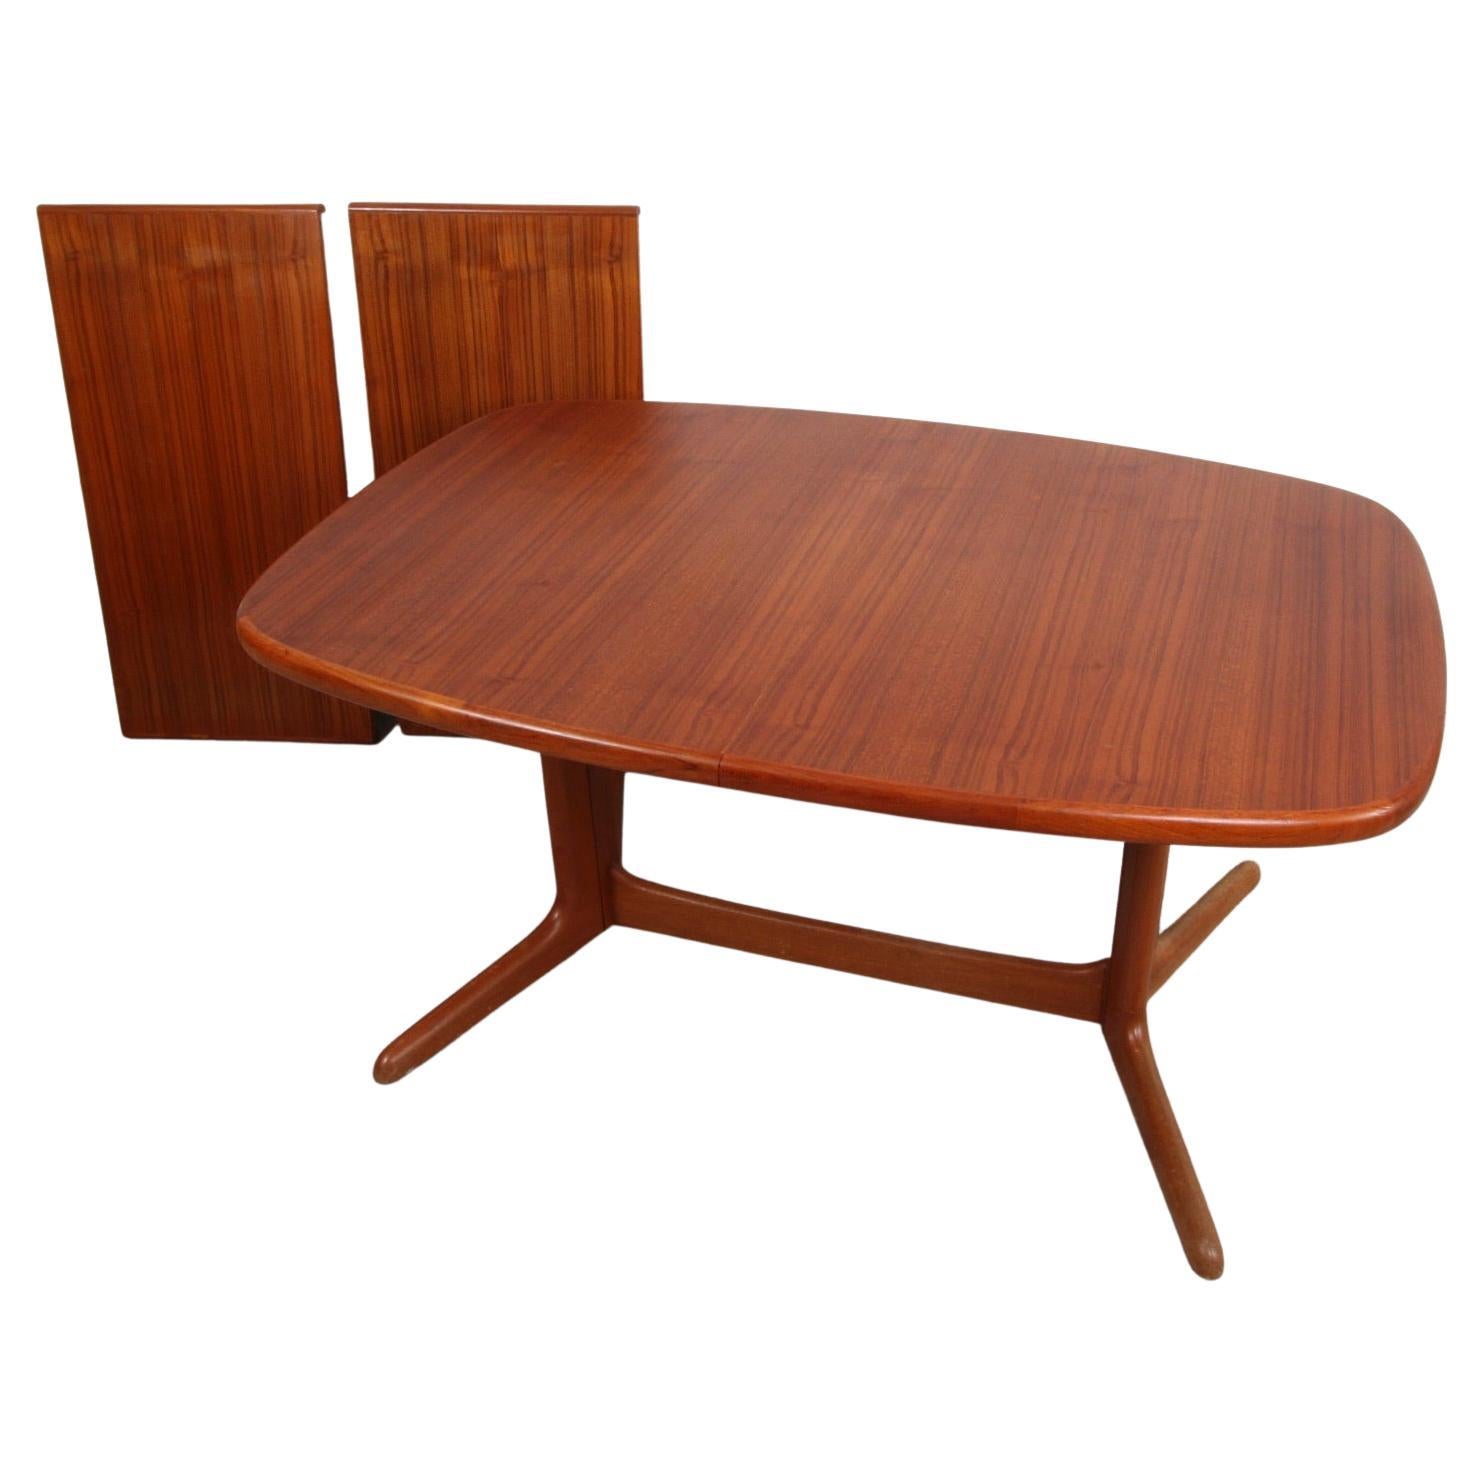  Danish Teak Oval Dining Table from Rasmus Solberg, 1960s For Sale